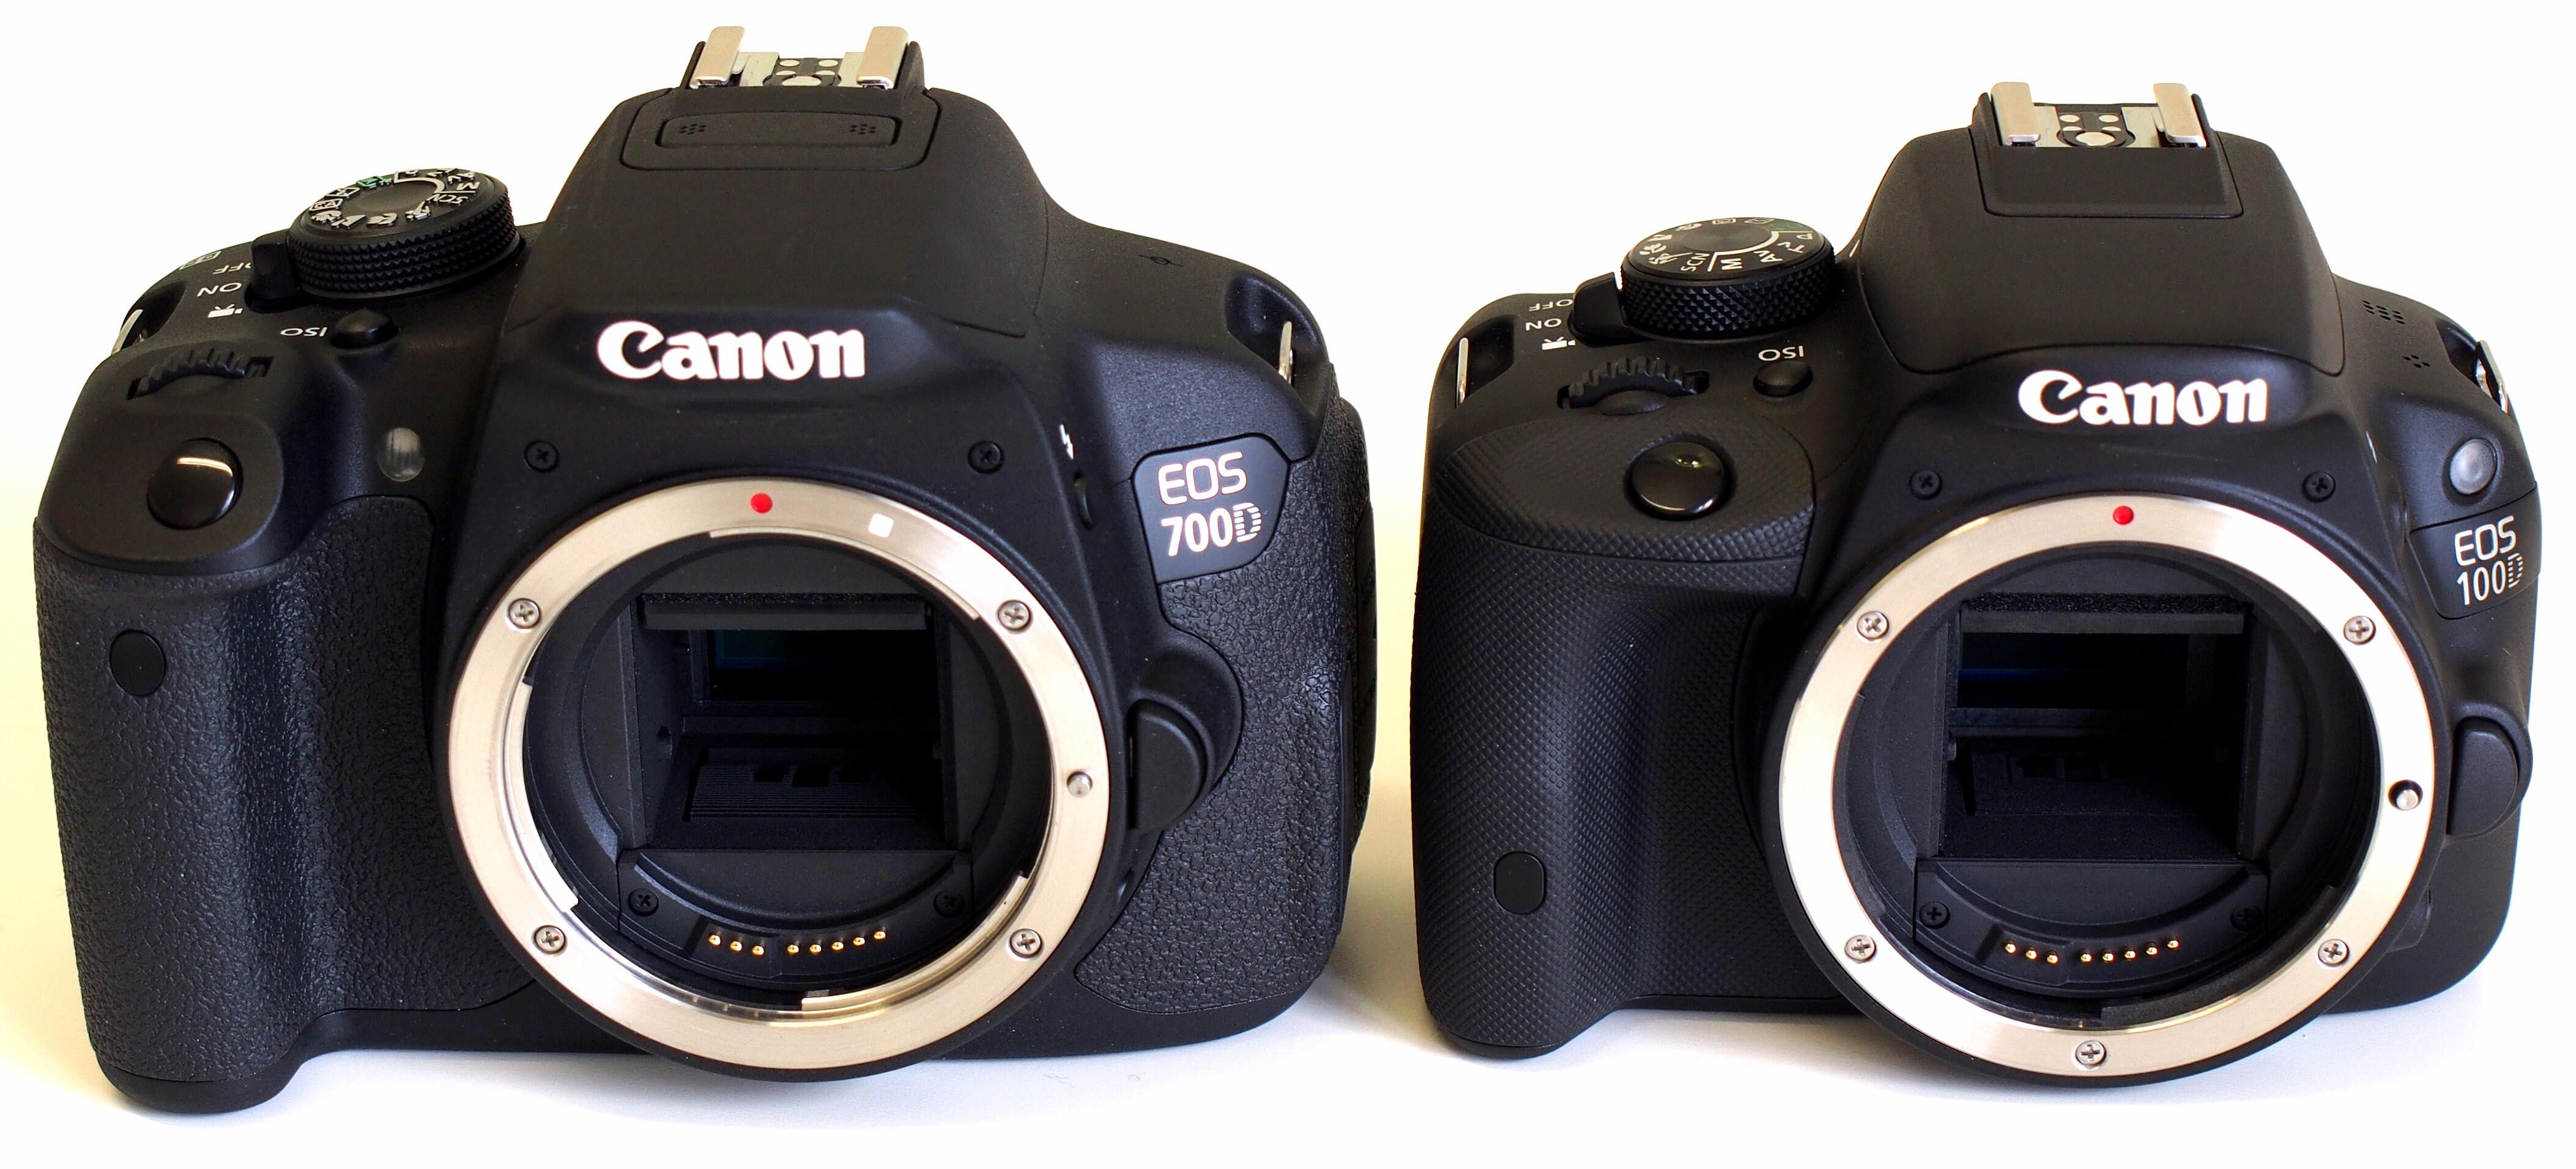 Highres Canon Eos 700d Vs 100d Front 1363821518